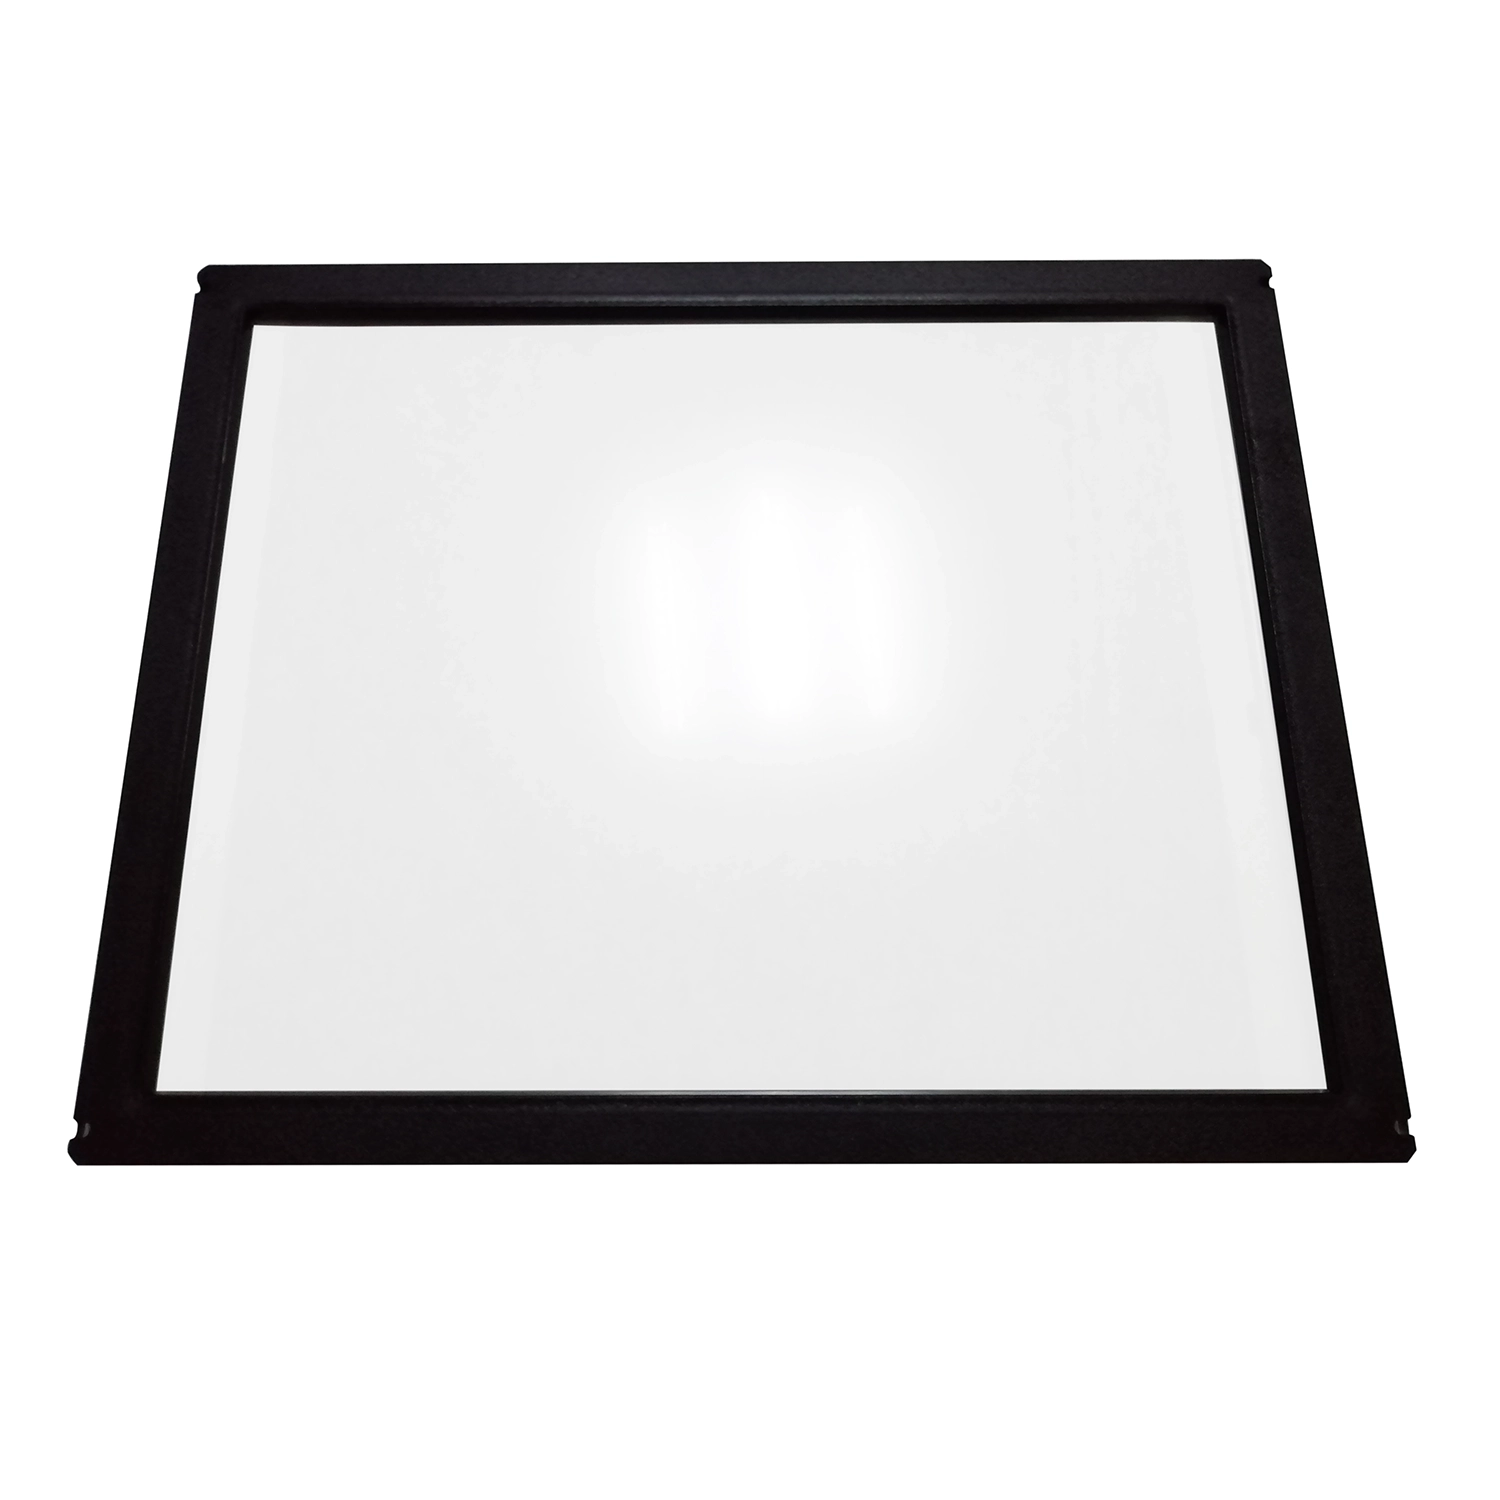 TOUCH FRAME WITH GLASS KEETOUCH 15" KP-150-IP2S0G1